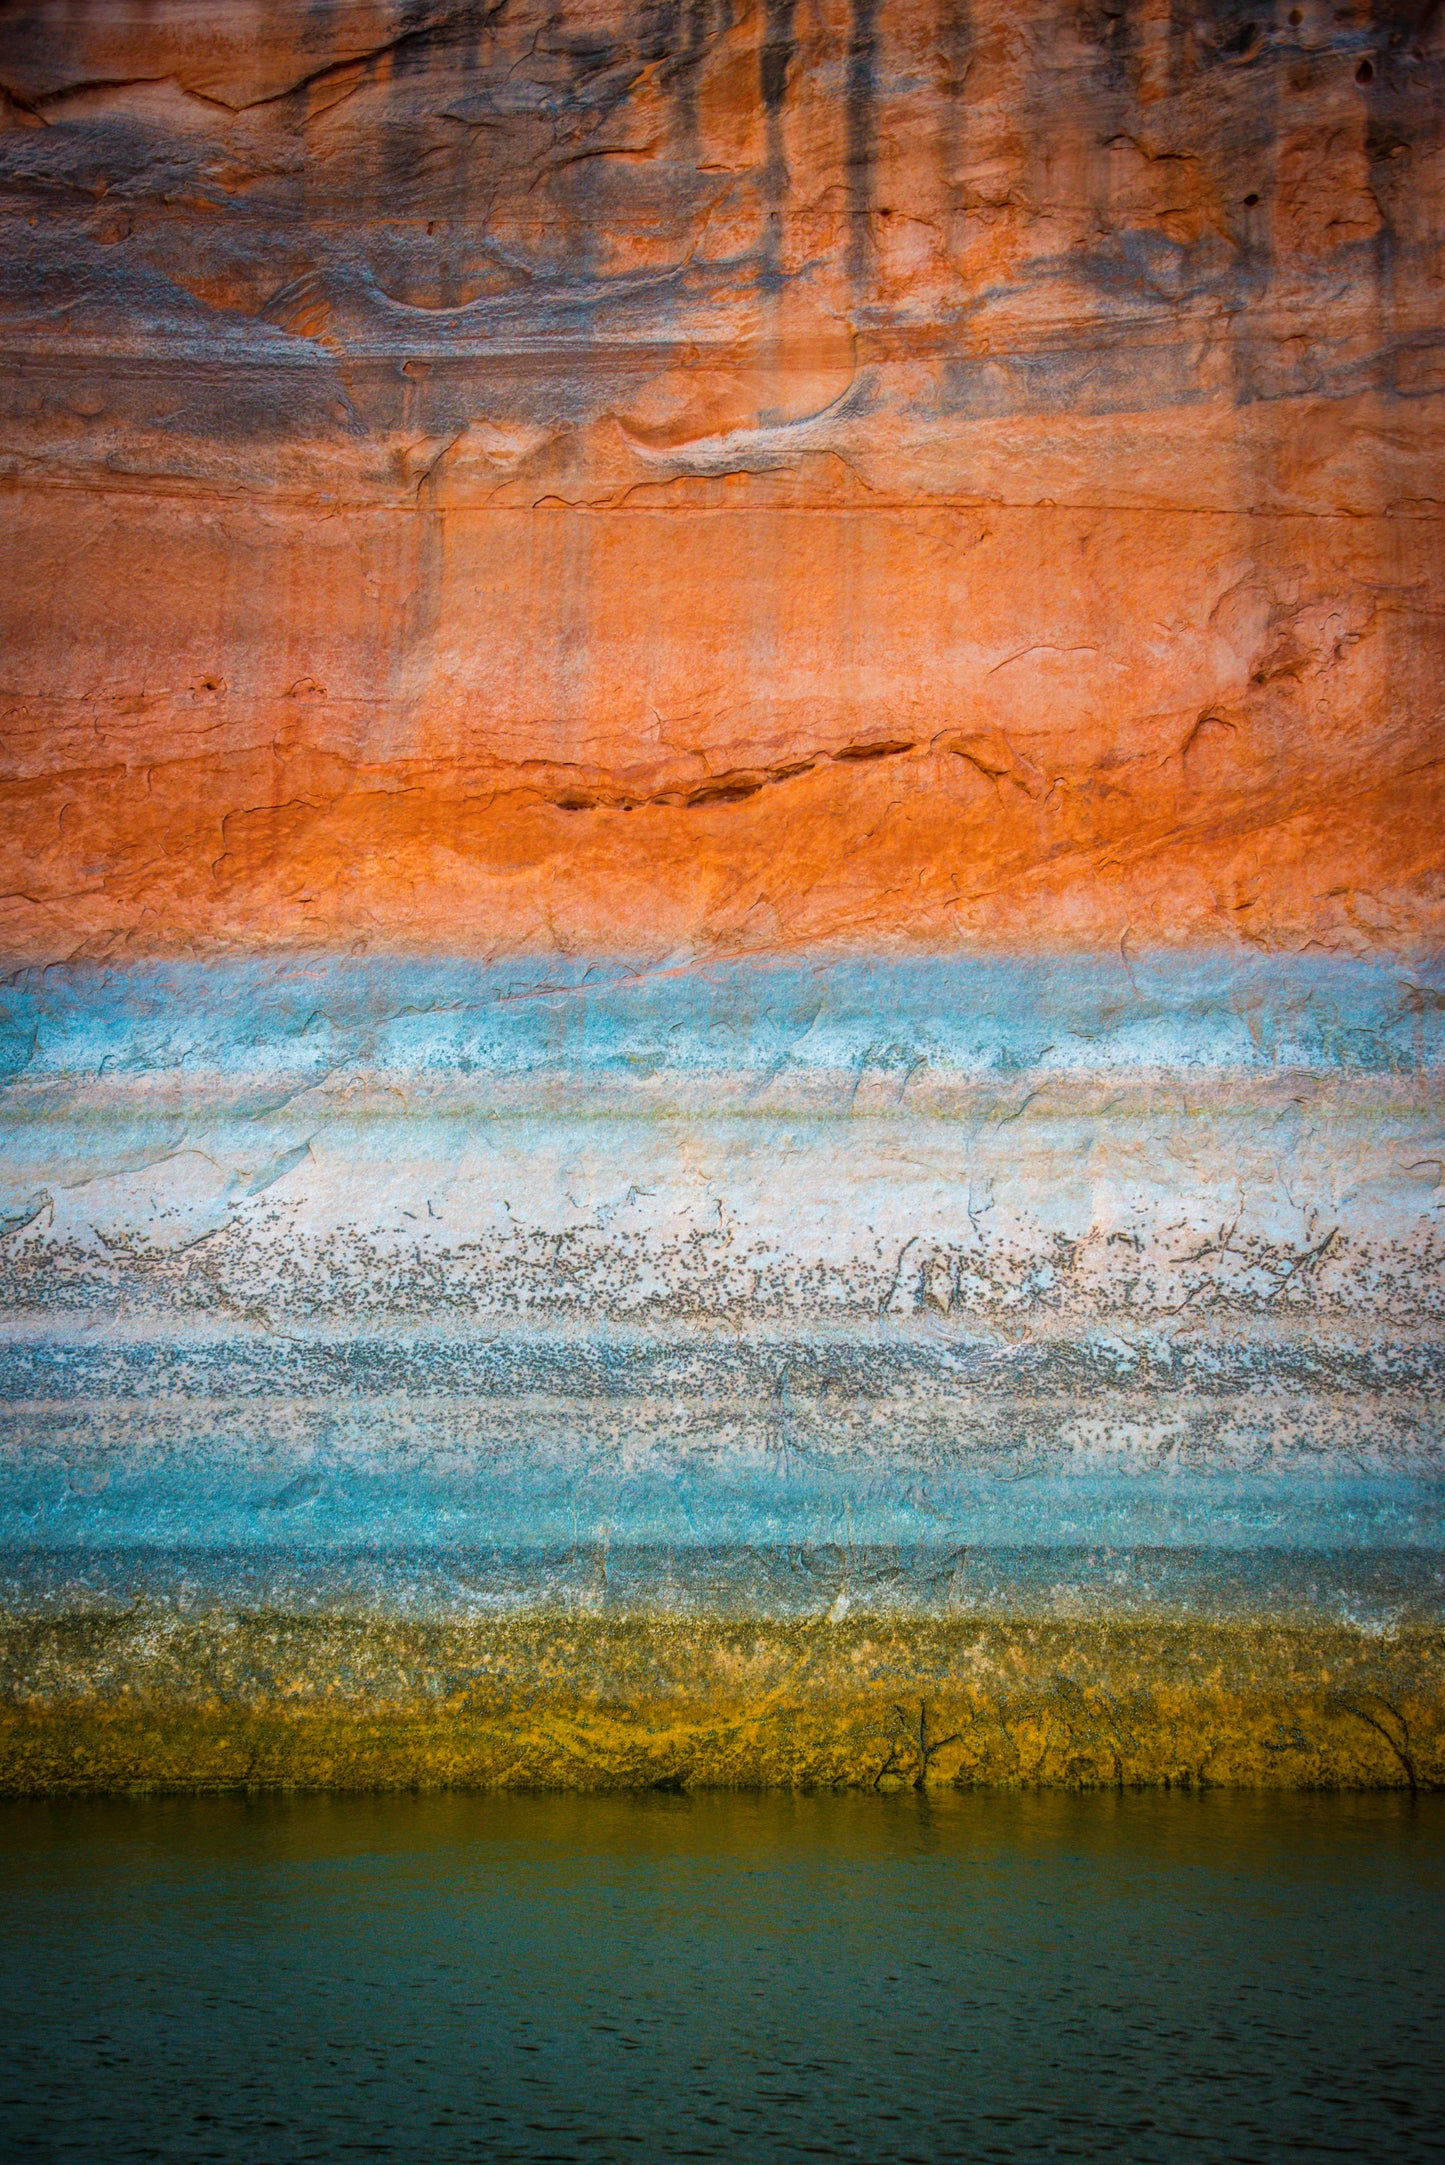 A beautiful gradient of green, blue, white, grey, red, orange, and black of the Glen canyon walls, sitting over the waters of Lake Powell, Utah. The colors tell the story of changes in water levels, minerals, and chemistry in the lake over time. As if time painted its story on the walls. 